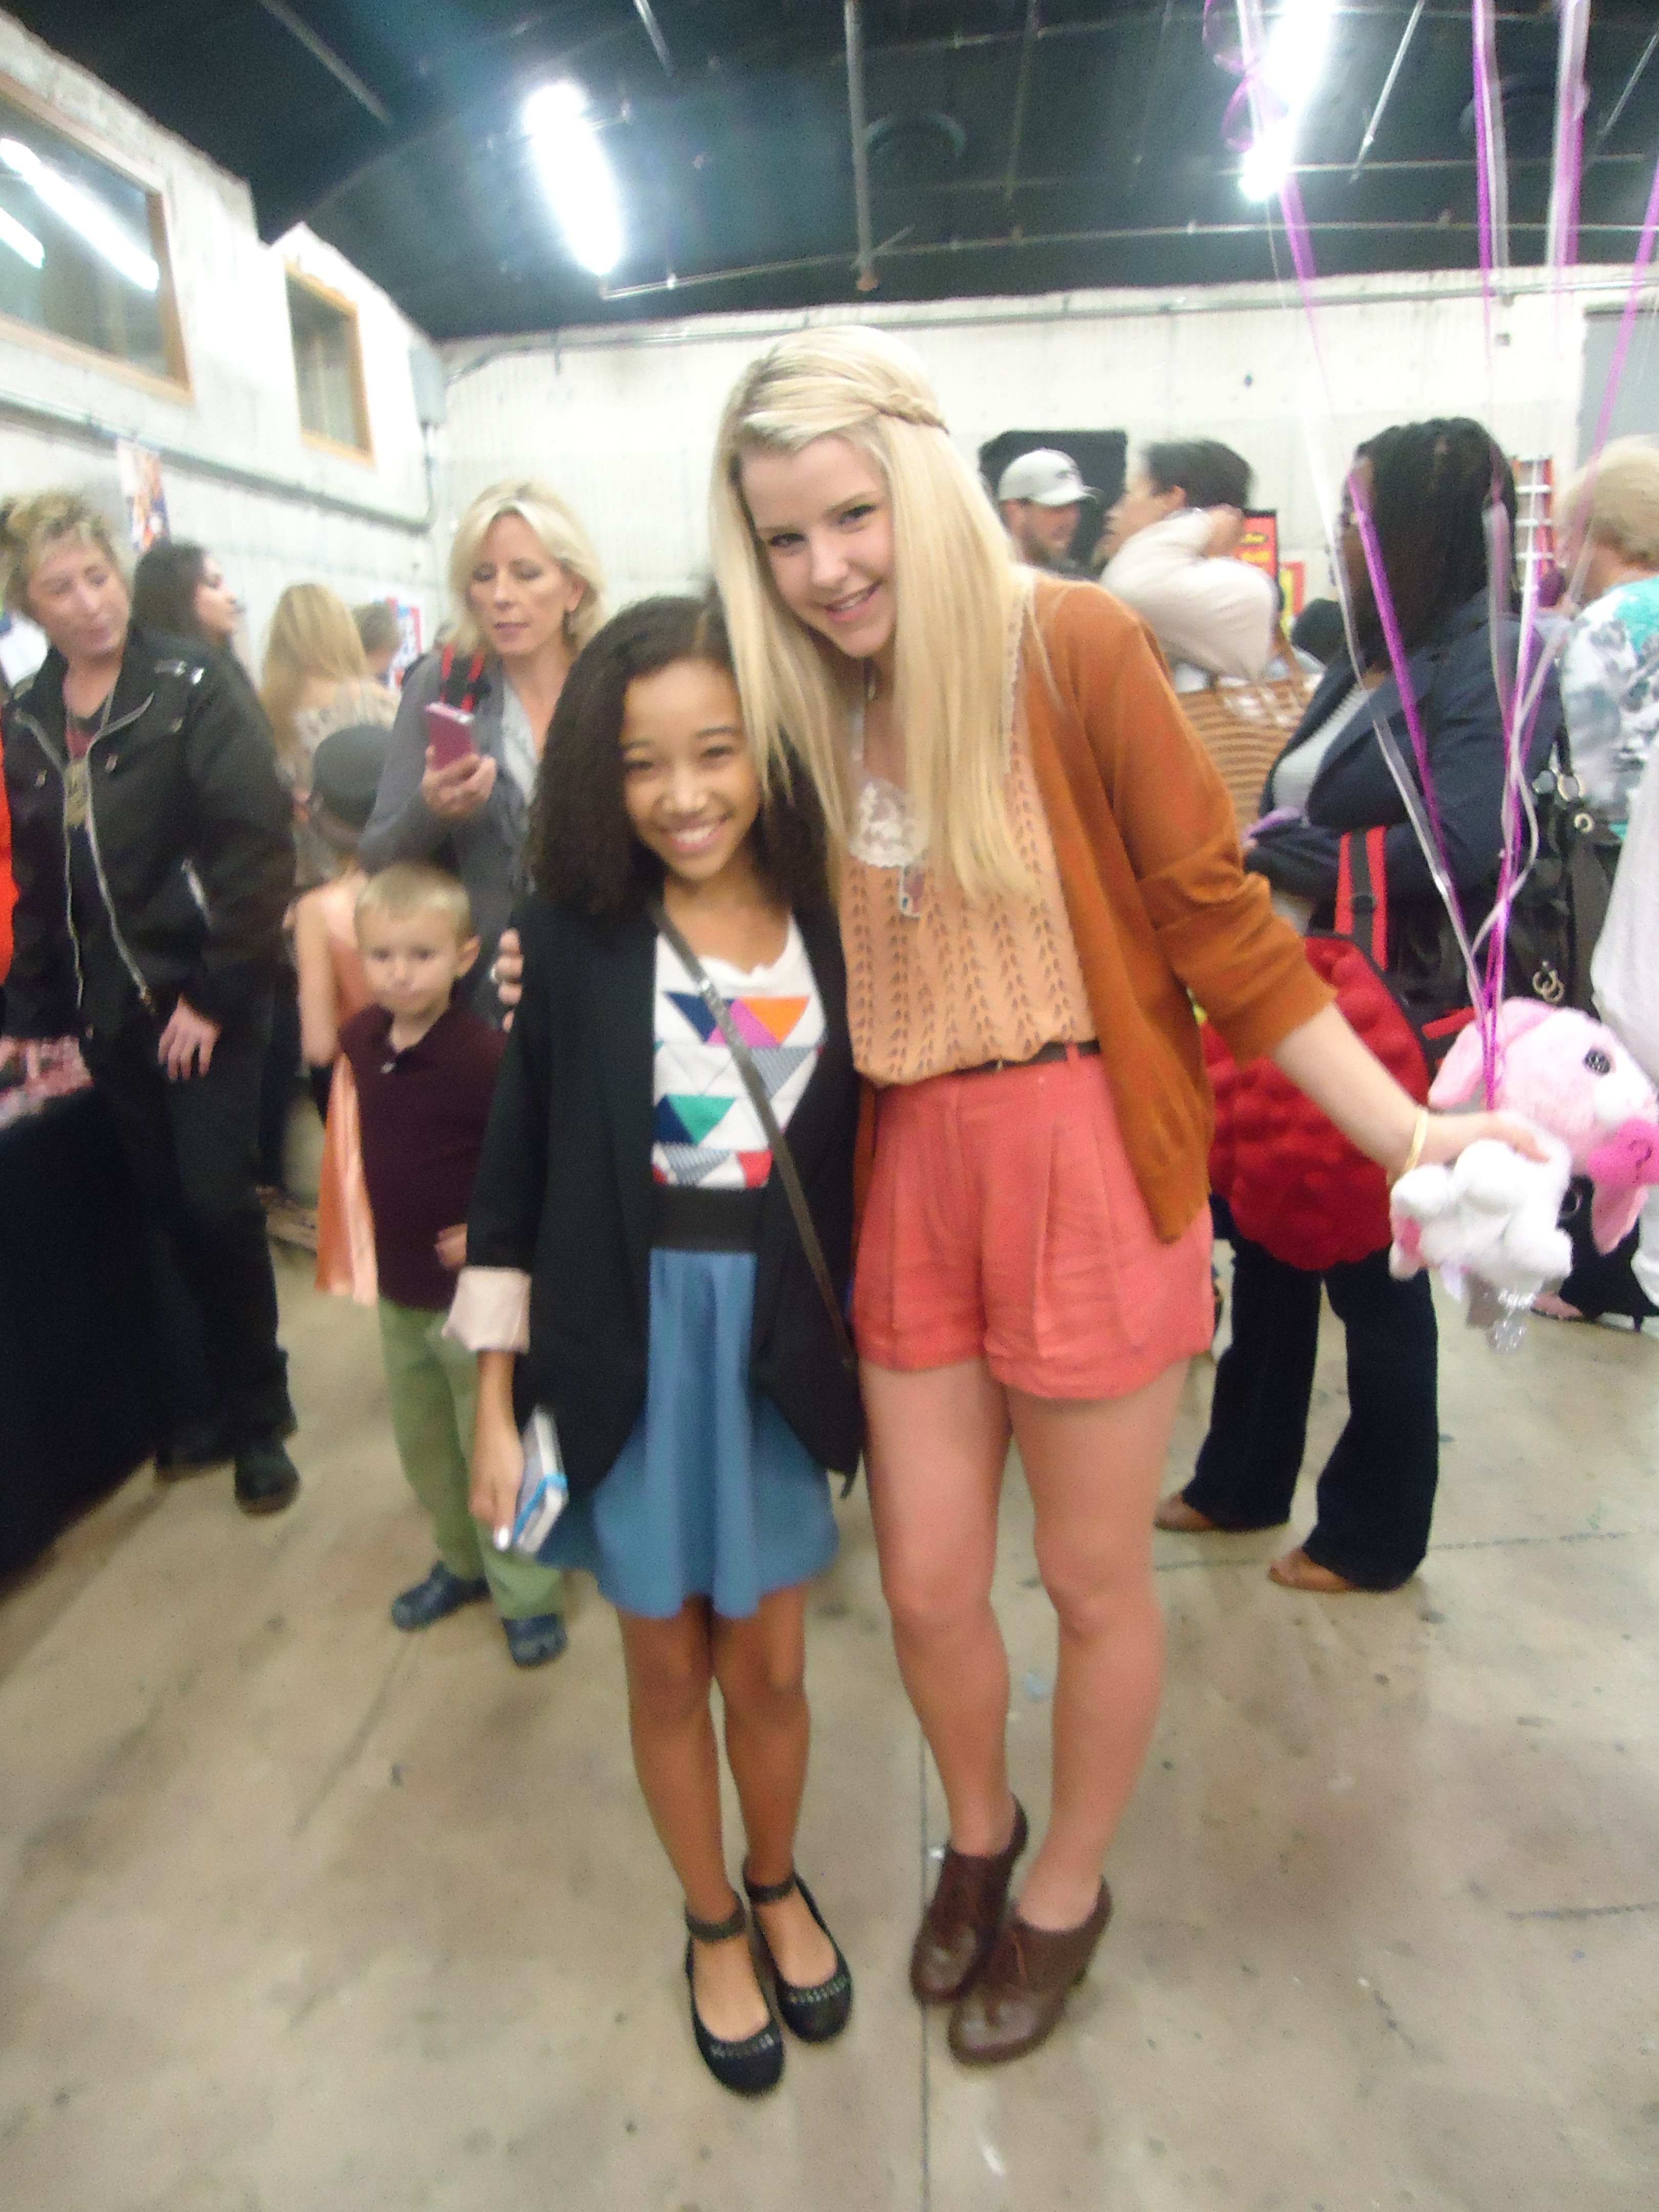 Madison Curtis with Amandla Stenberg who plays Rue in Hunger Games